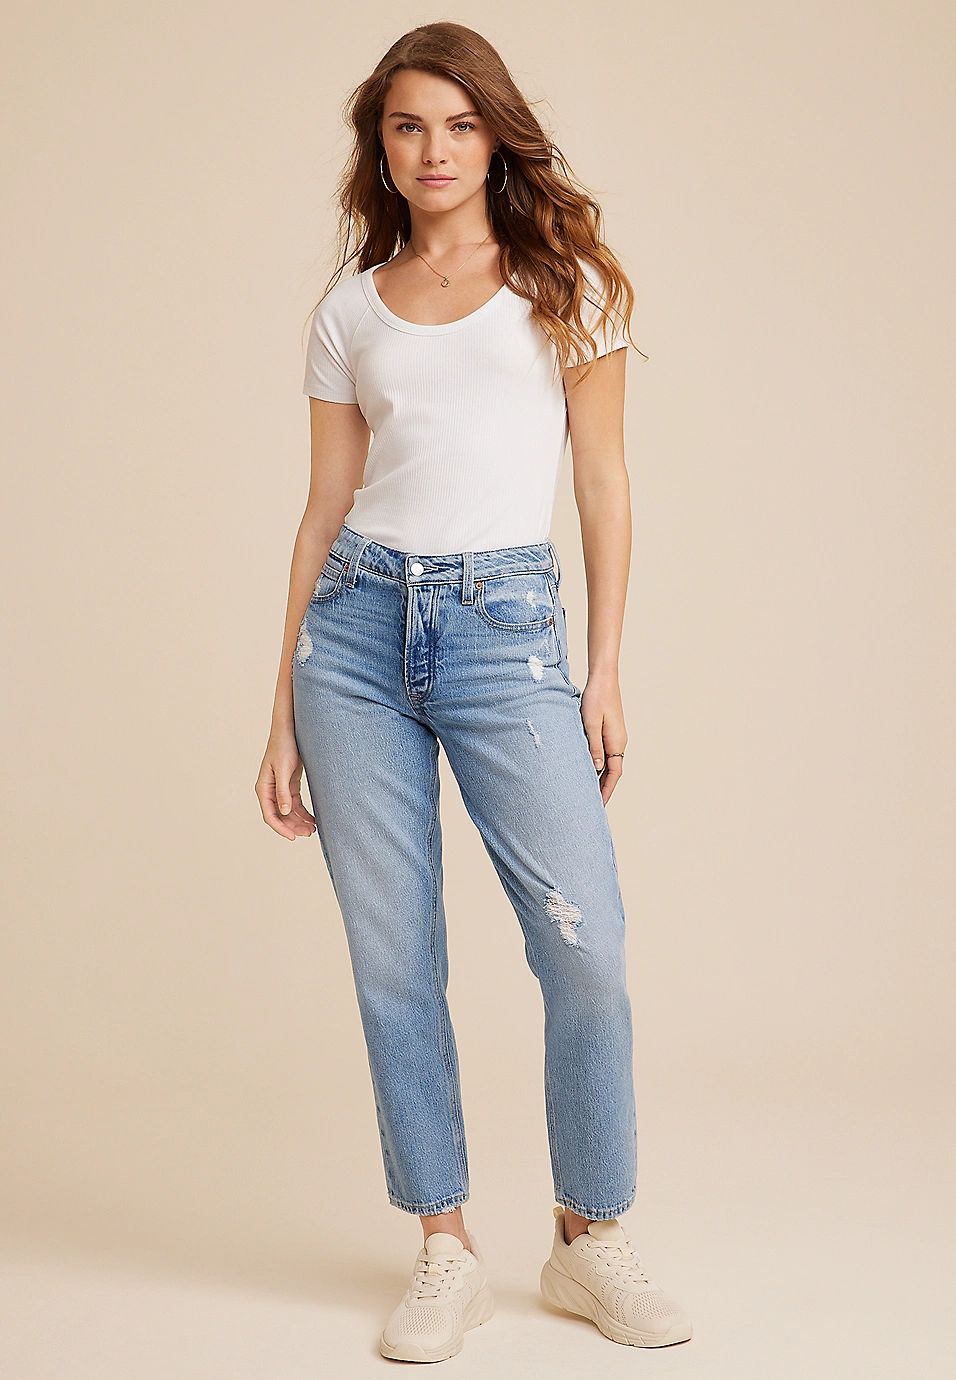 Goldie Blues™ High Rise Curvy Light Cheeky Taper Ankle Jean | Maurices